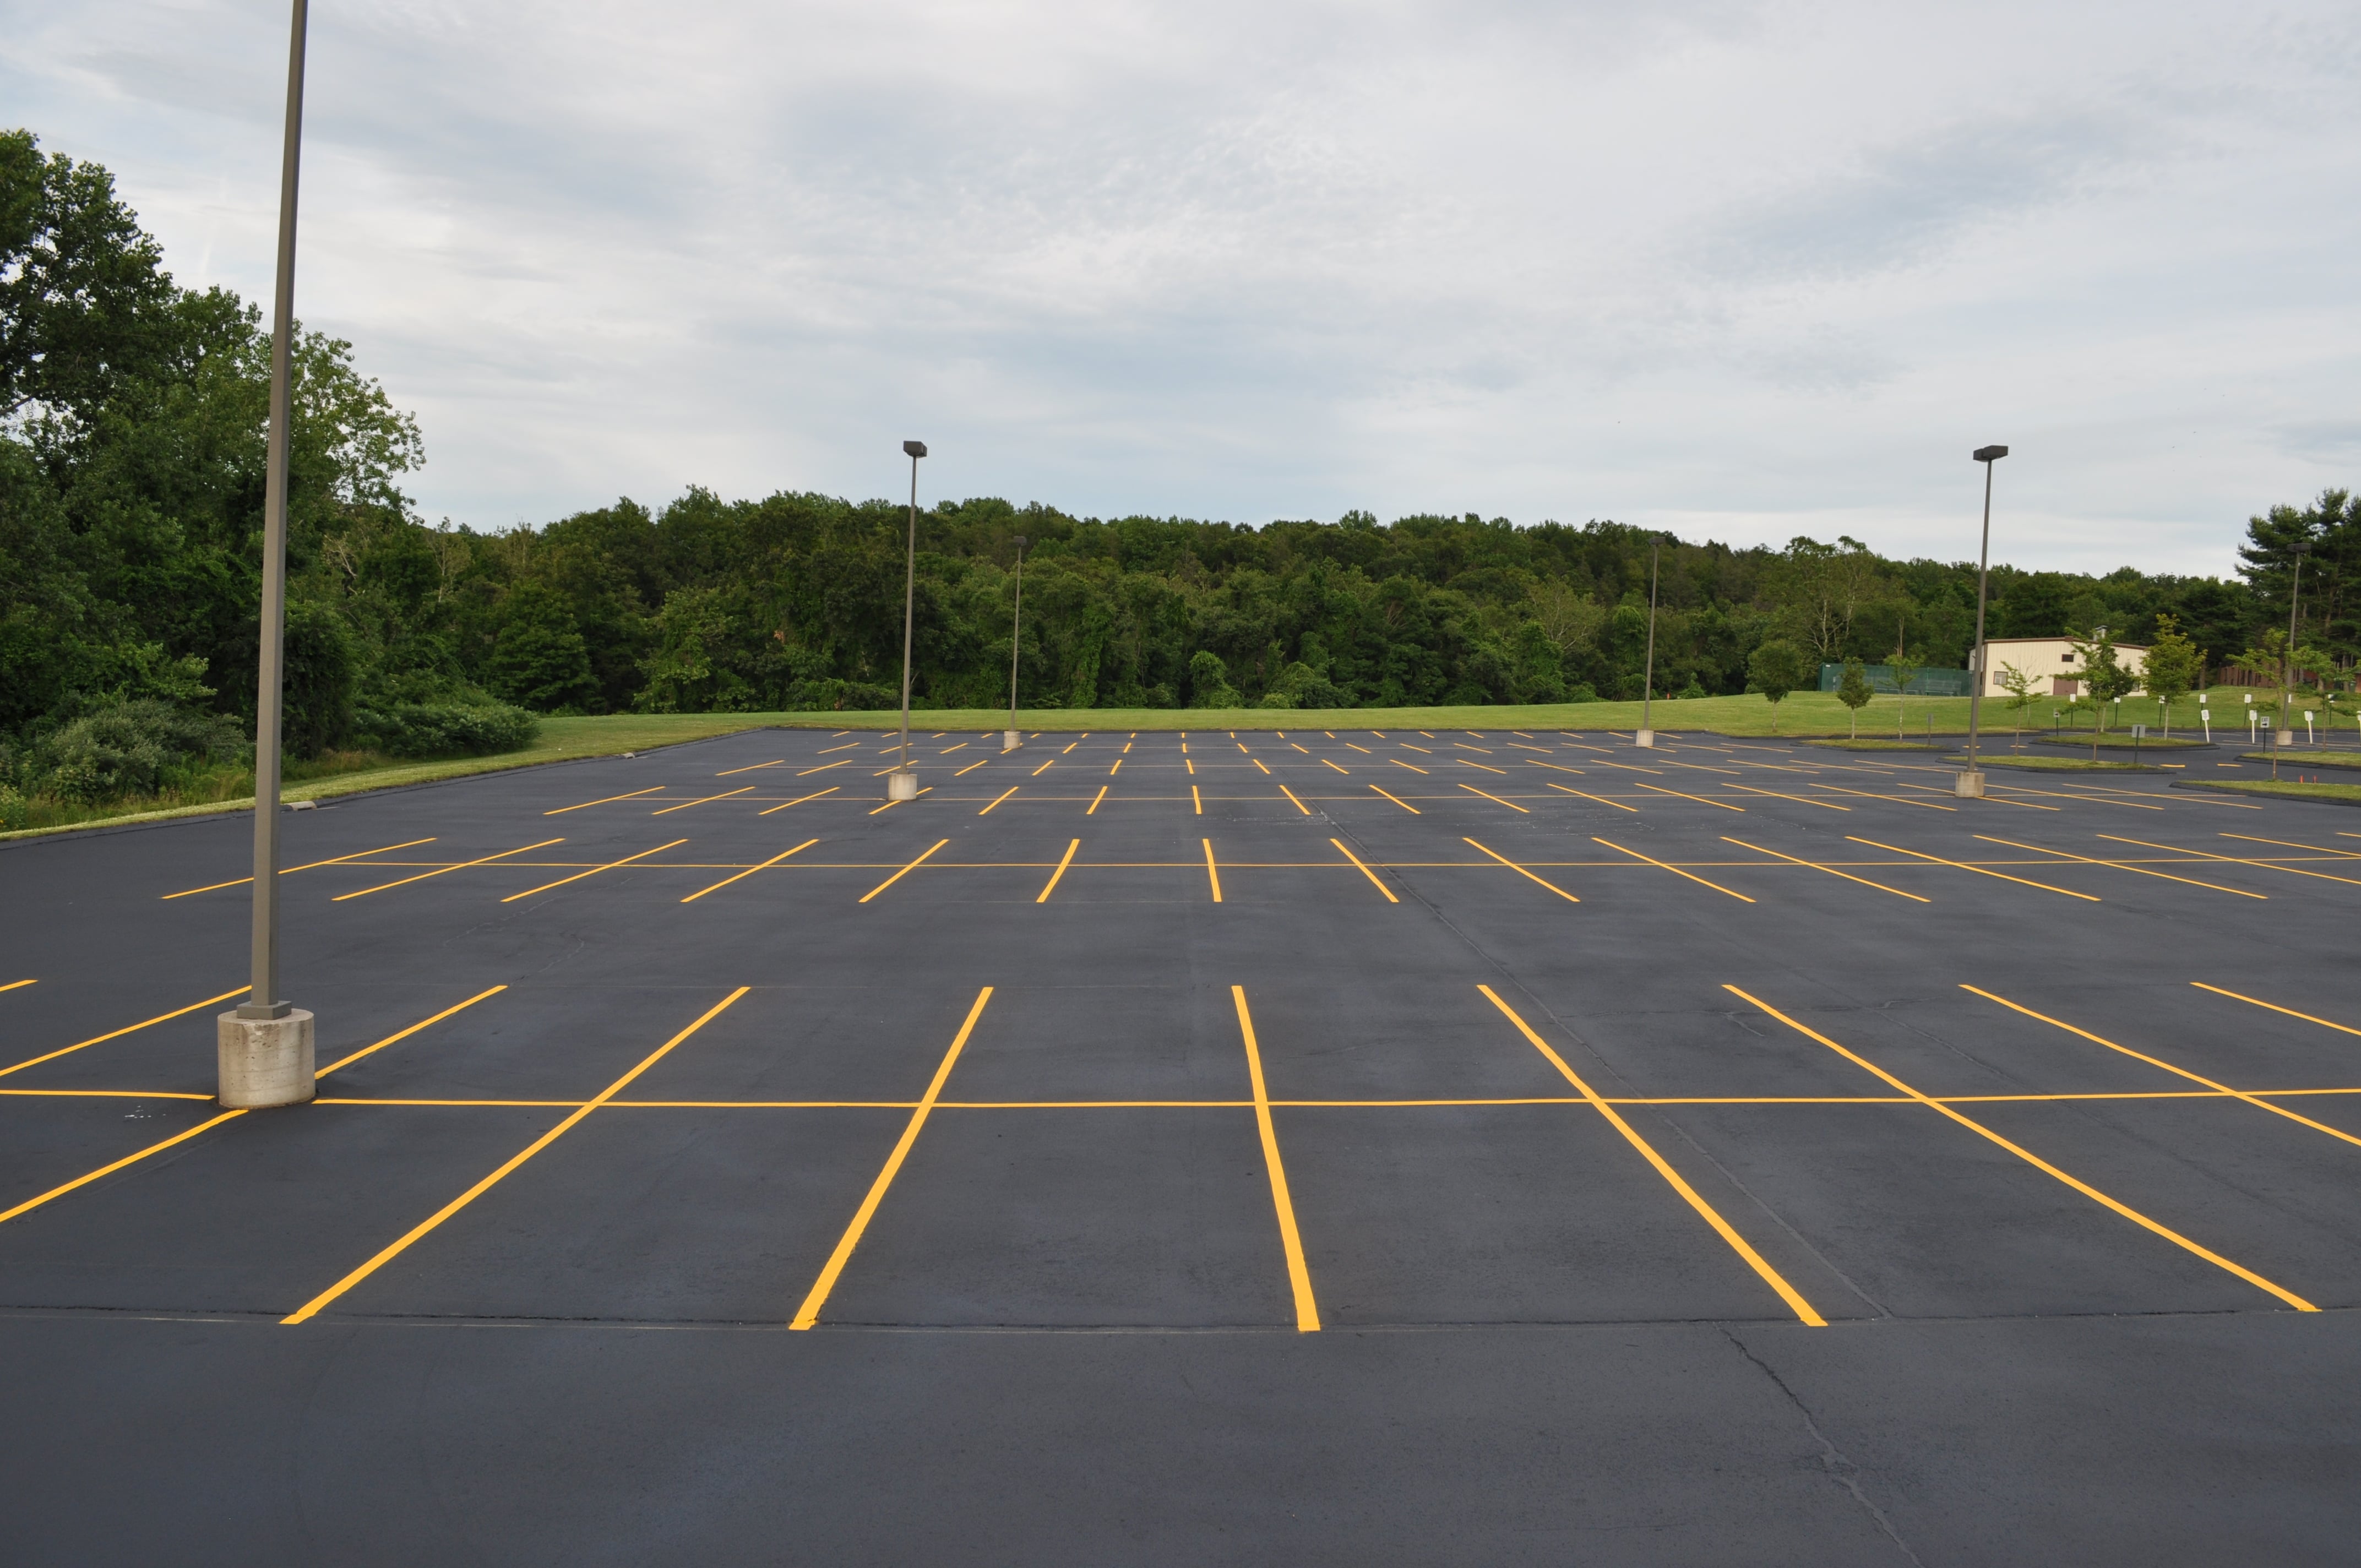 More parking lots